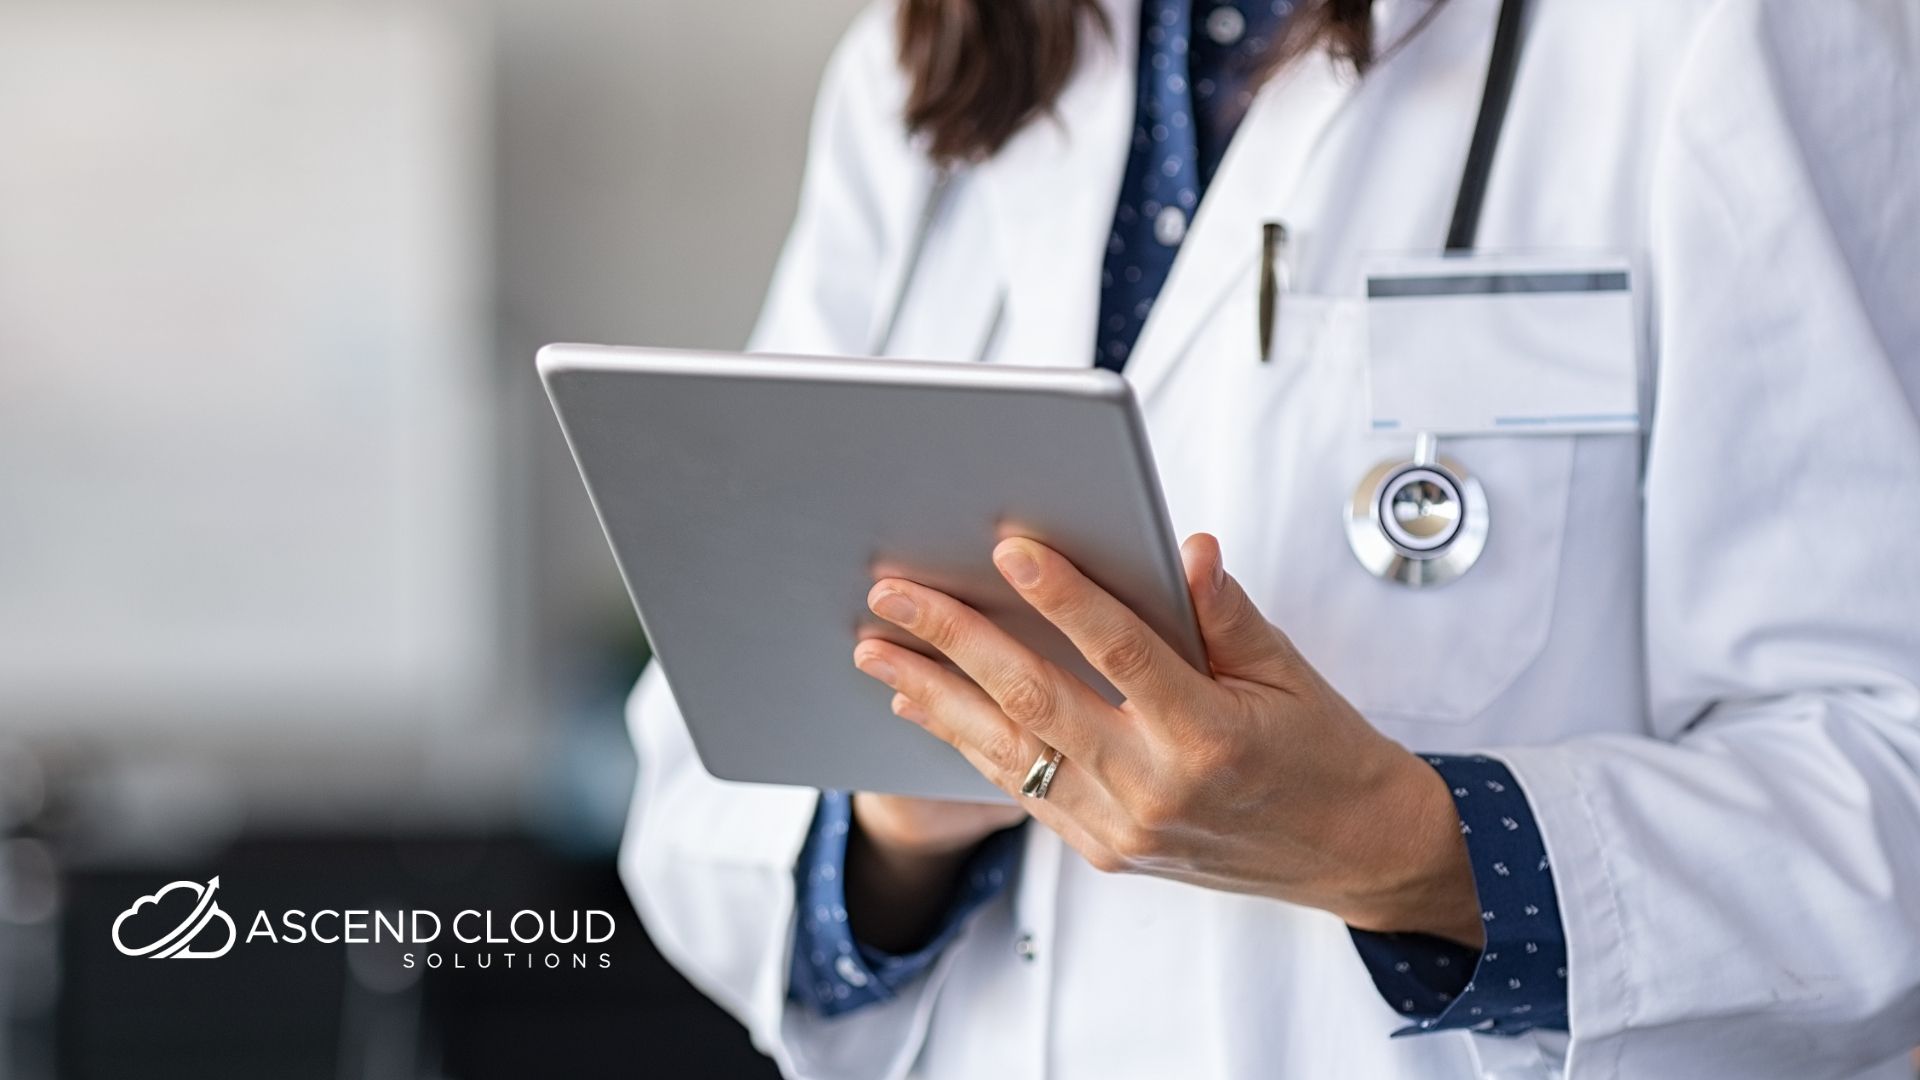 Many industries are undergoing a digital transformation – and healthcare is no exception. Find out where we're at and where we might be heading.